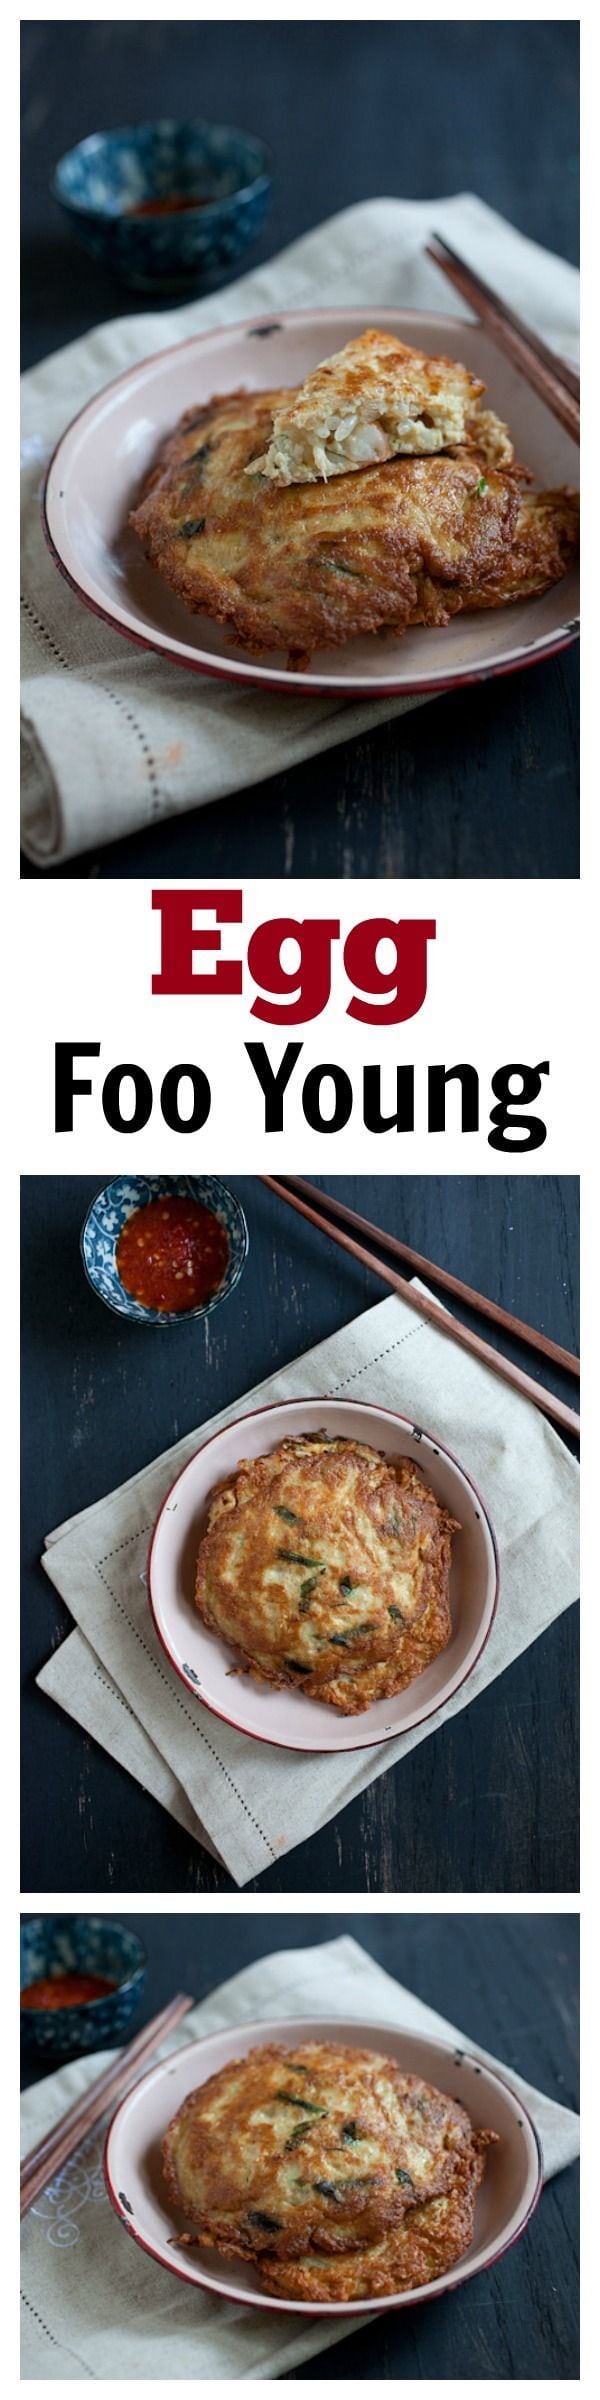 Egg Foo Young -  Chinese-style omelet filled with ground pork and various vegetables. This is an authentic egg foo young recipe | rasamalaysia.com